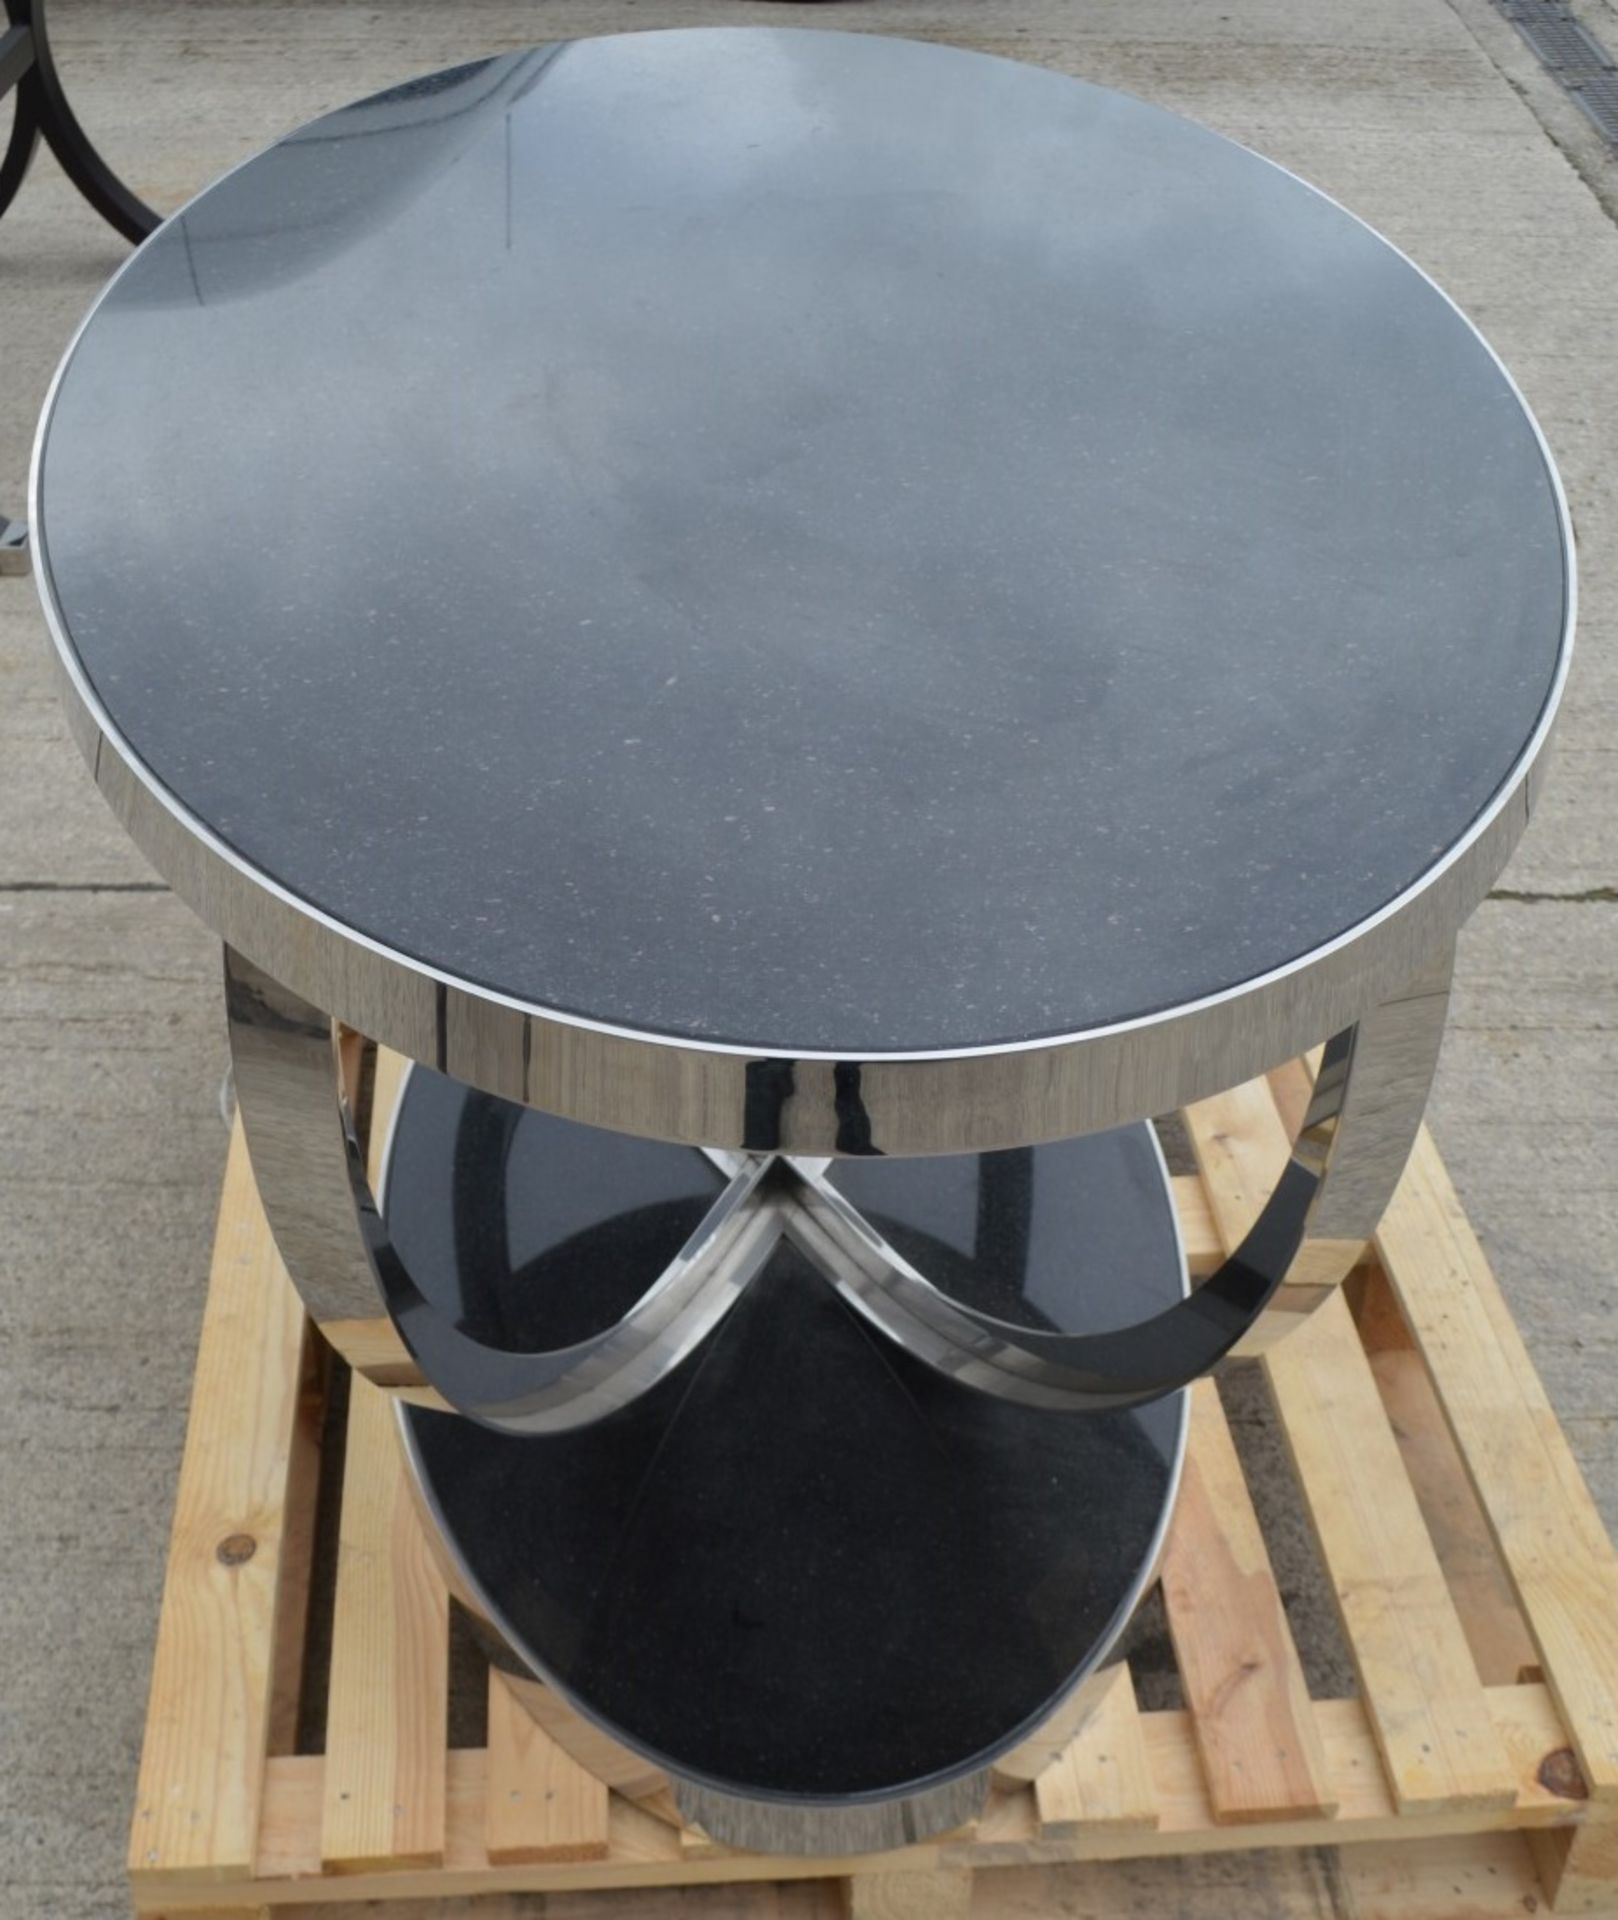 1 x Stunning 1.5 Metre Metal Oval Table With A Granite Style Surface And Sculptural Cross Base - Image 2 of 3